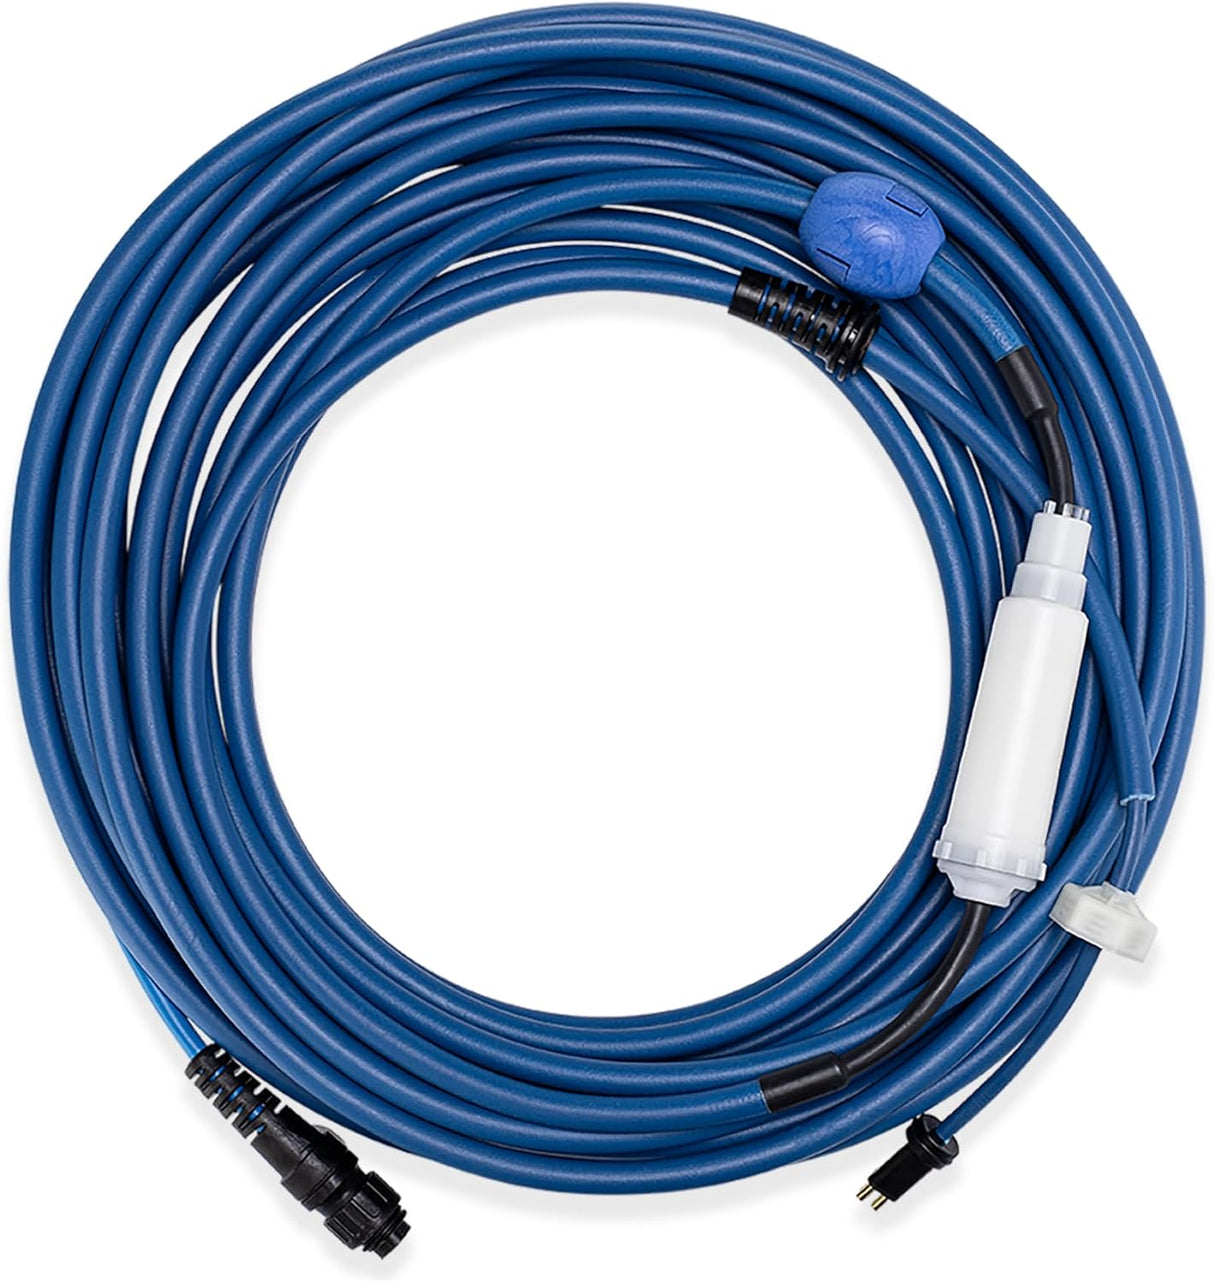 18 m floating cable equipped with Swivel with connectors